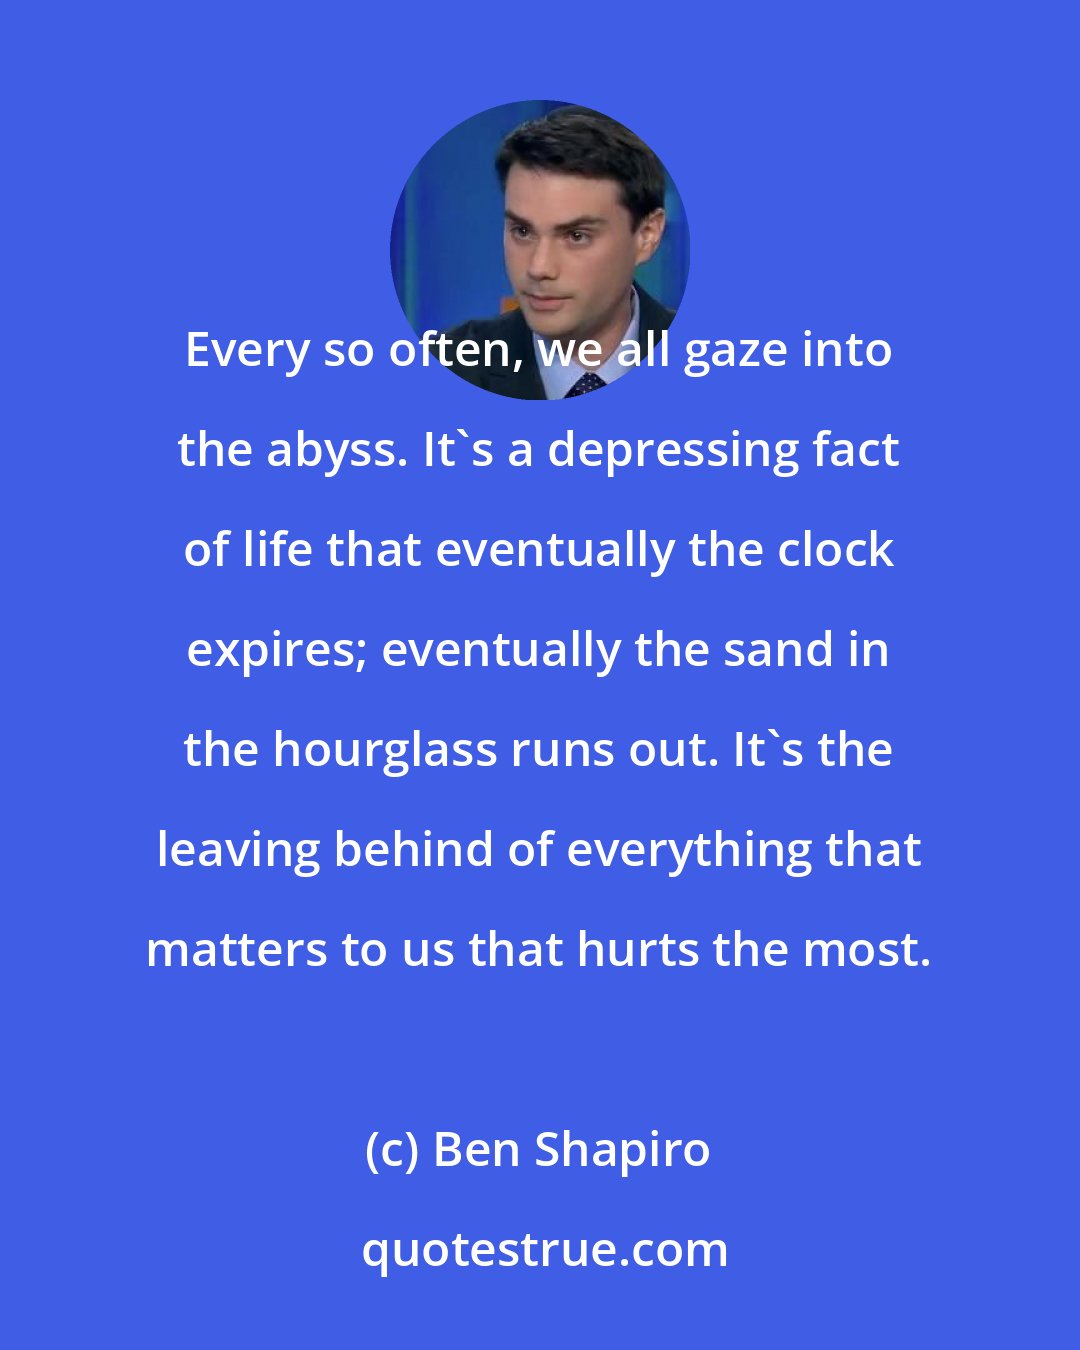 Ben Shapiro: Every so often, we all gaze into the abyss. It's a depressing fact of life that eventually the clock expires; eventually the sand in the hourglass runs out. It's the leaving behind of everything that matters to us that hurts the most.